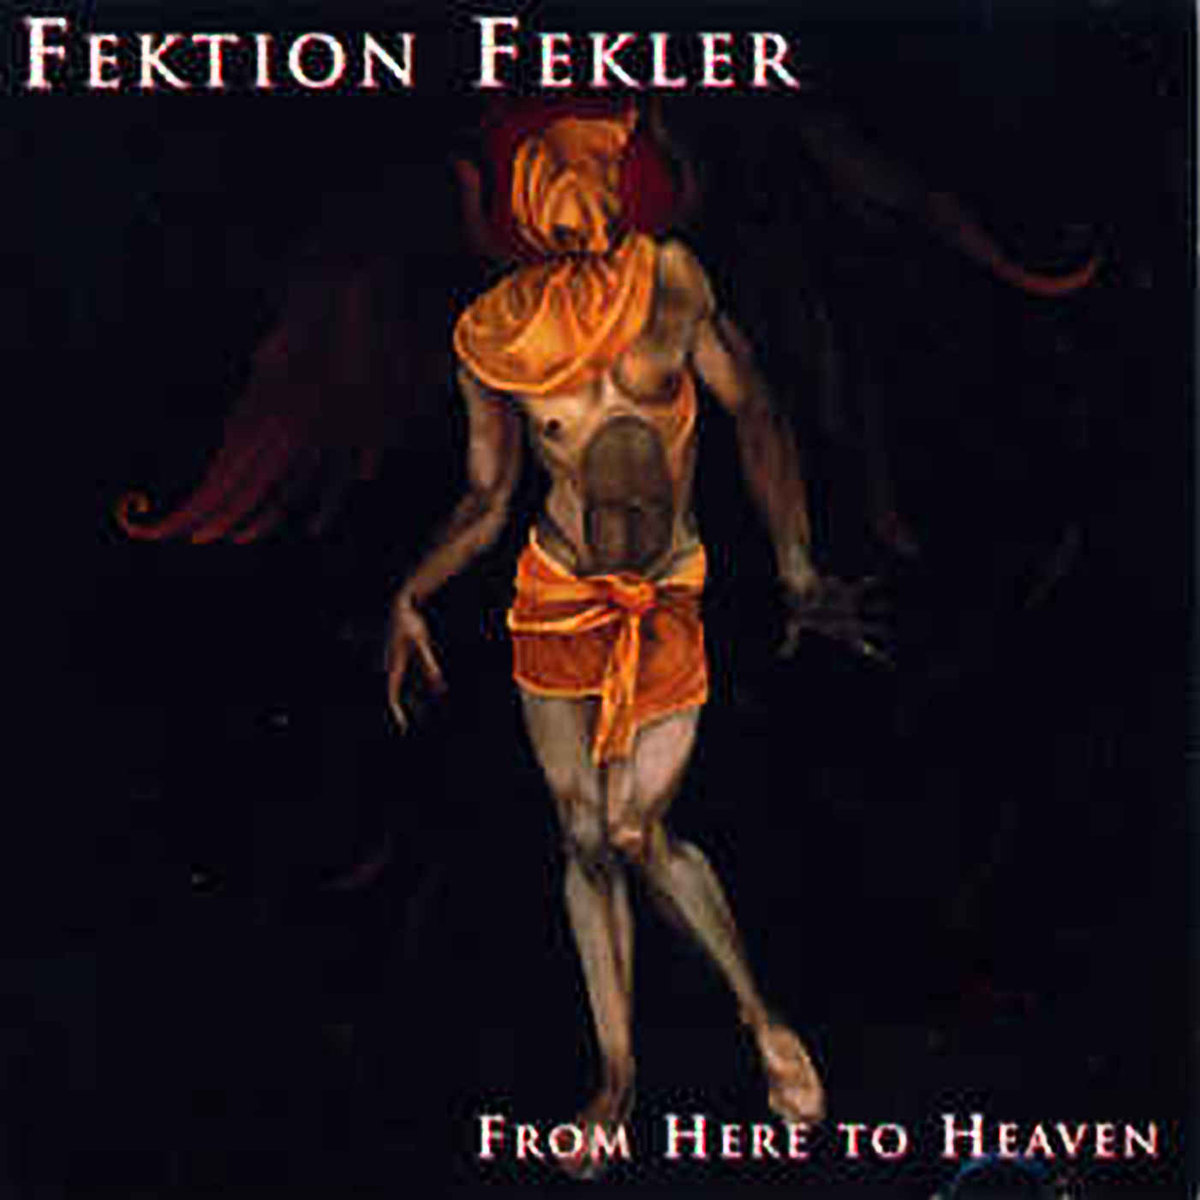 Replicas: Fektion Fekler, “From Here to Heaven”